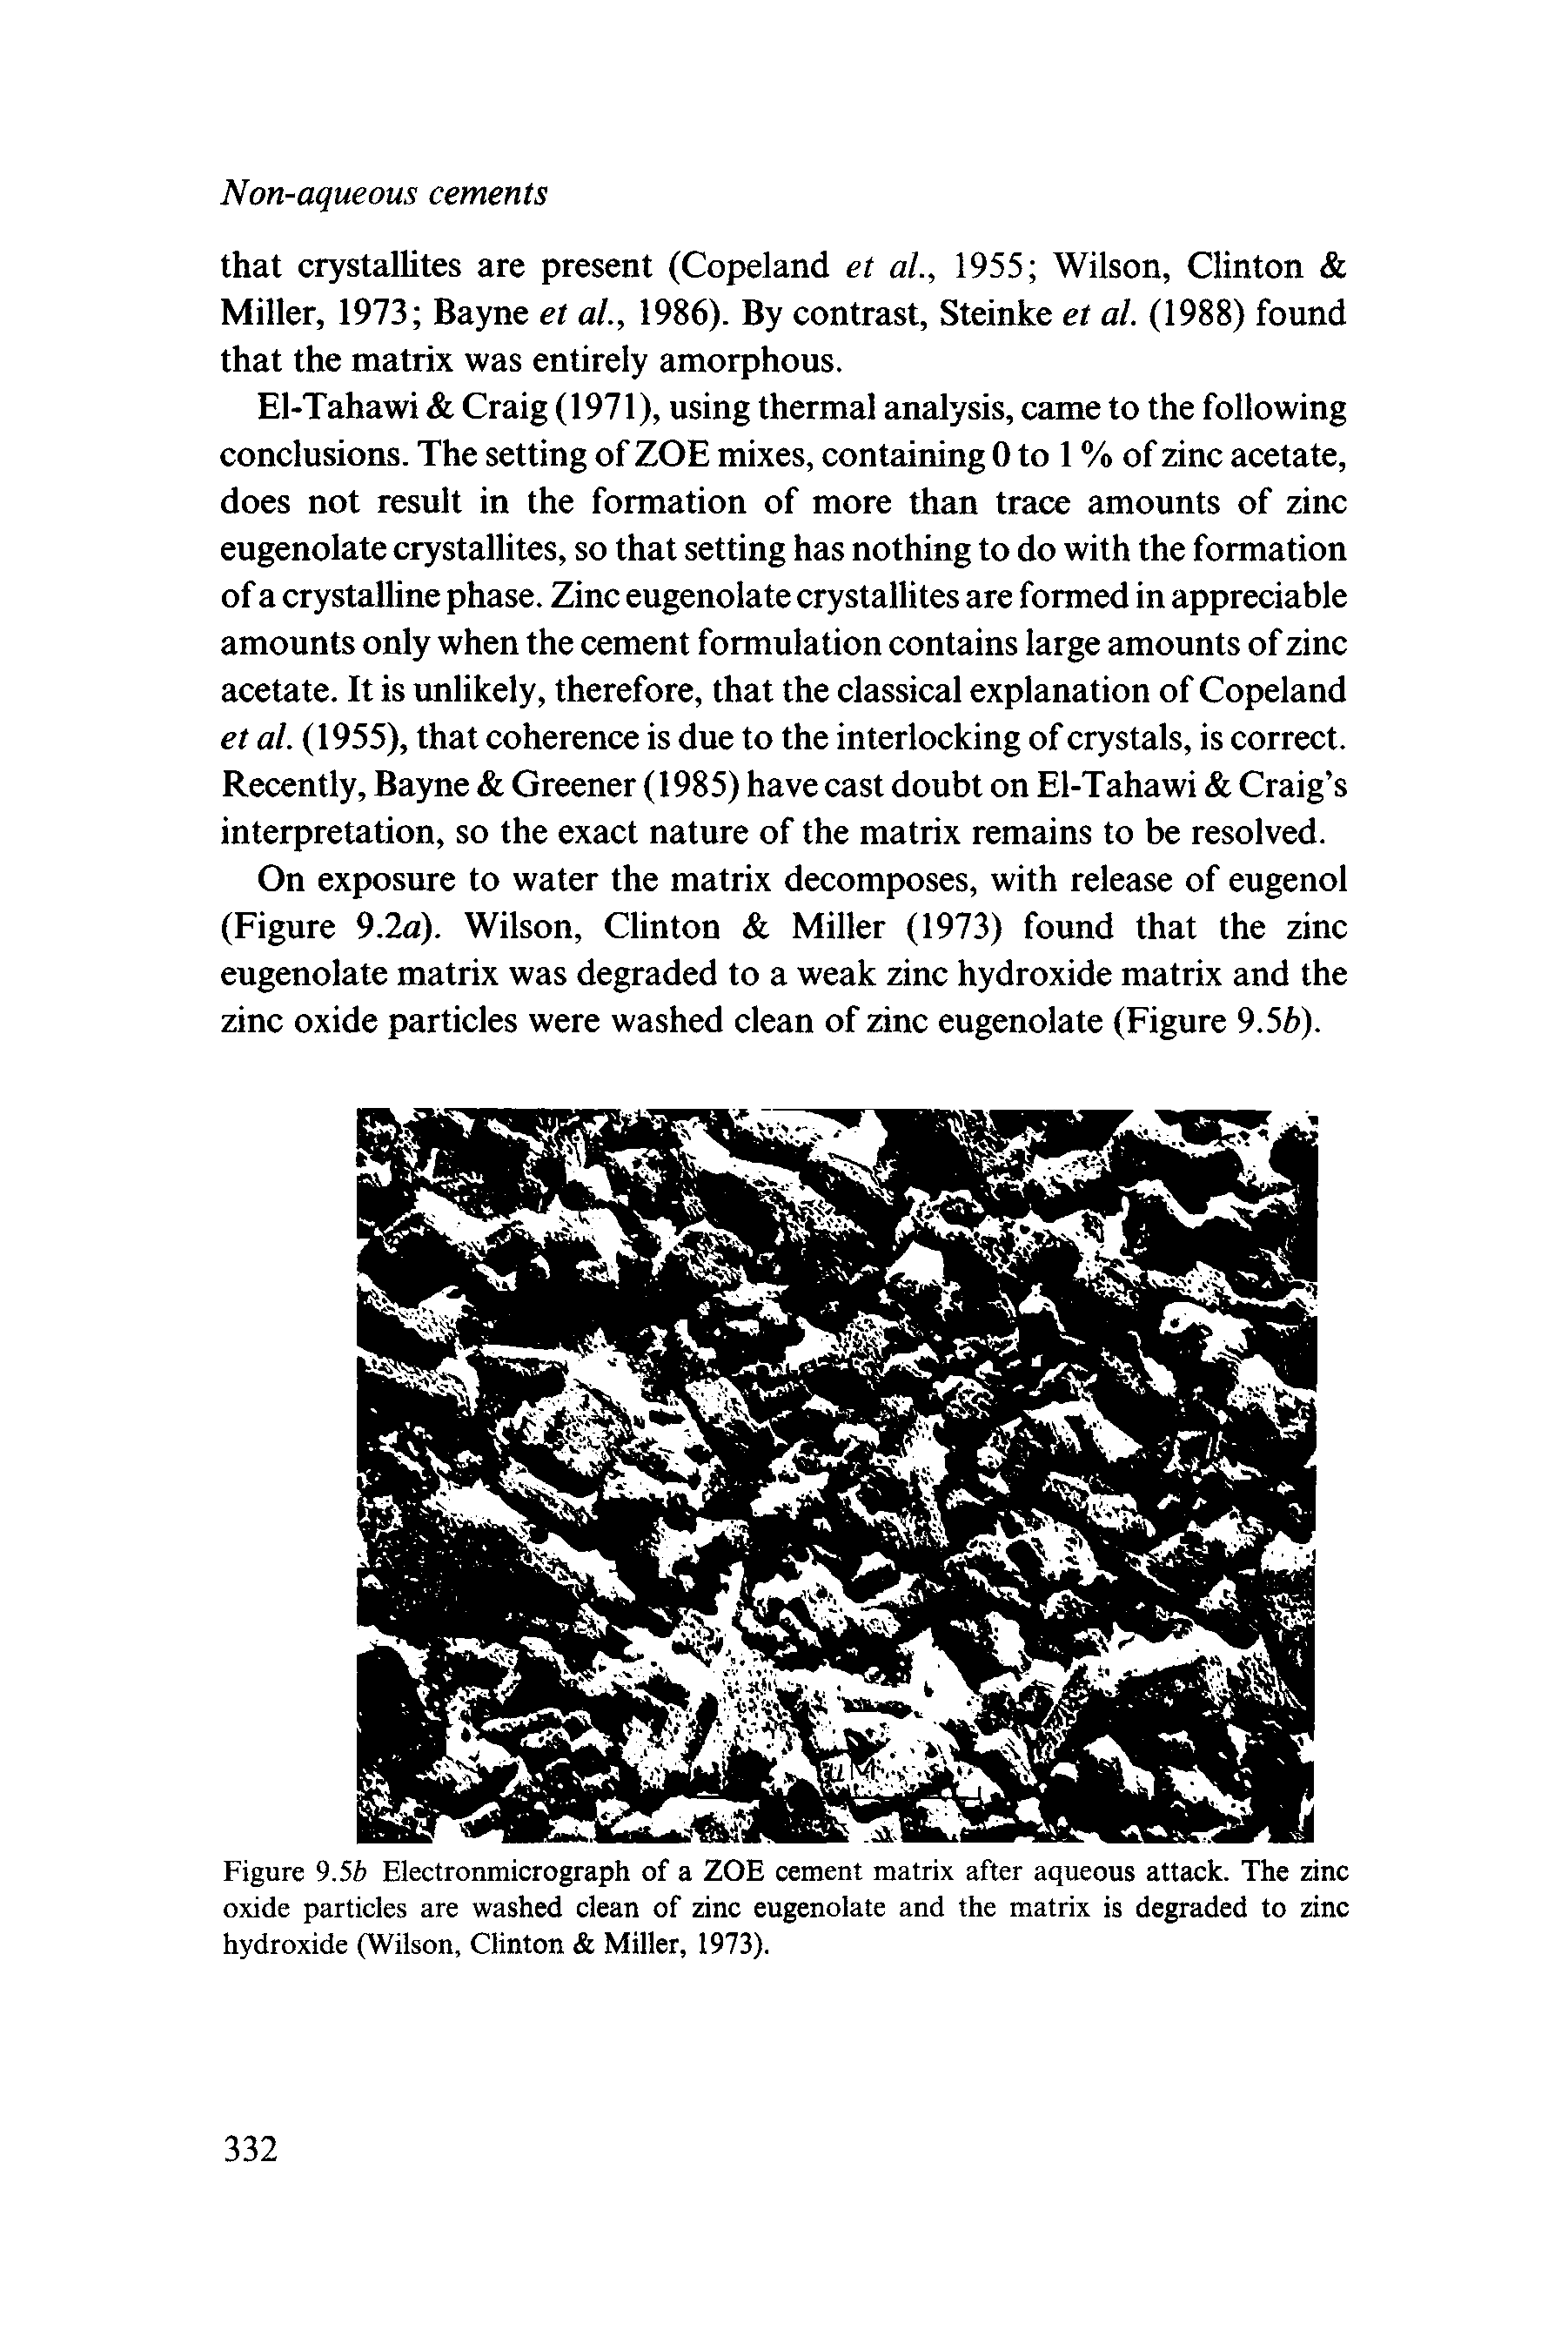 Figure 9.5b Electronmicrograph of a ZOE cement matrix after aqueous attack. The zinc oxide particles are washed clean of zinc eugenolate and the matrix is degraded to zinc hydroxide (Wilson, Clinton Miller, 1973).